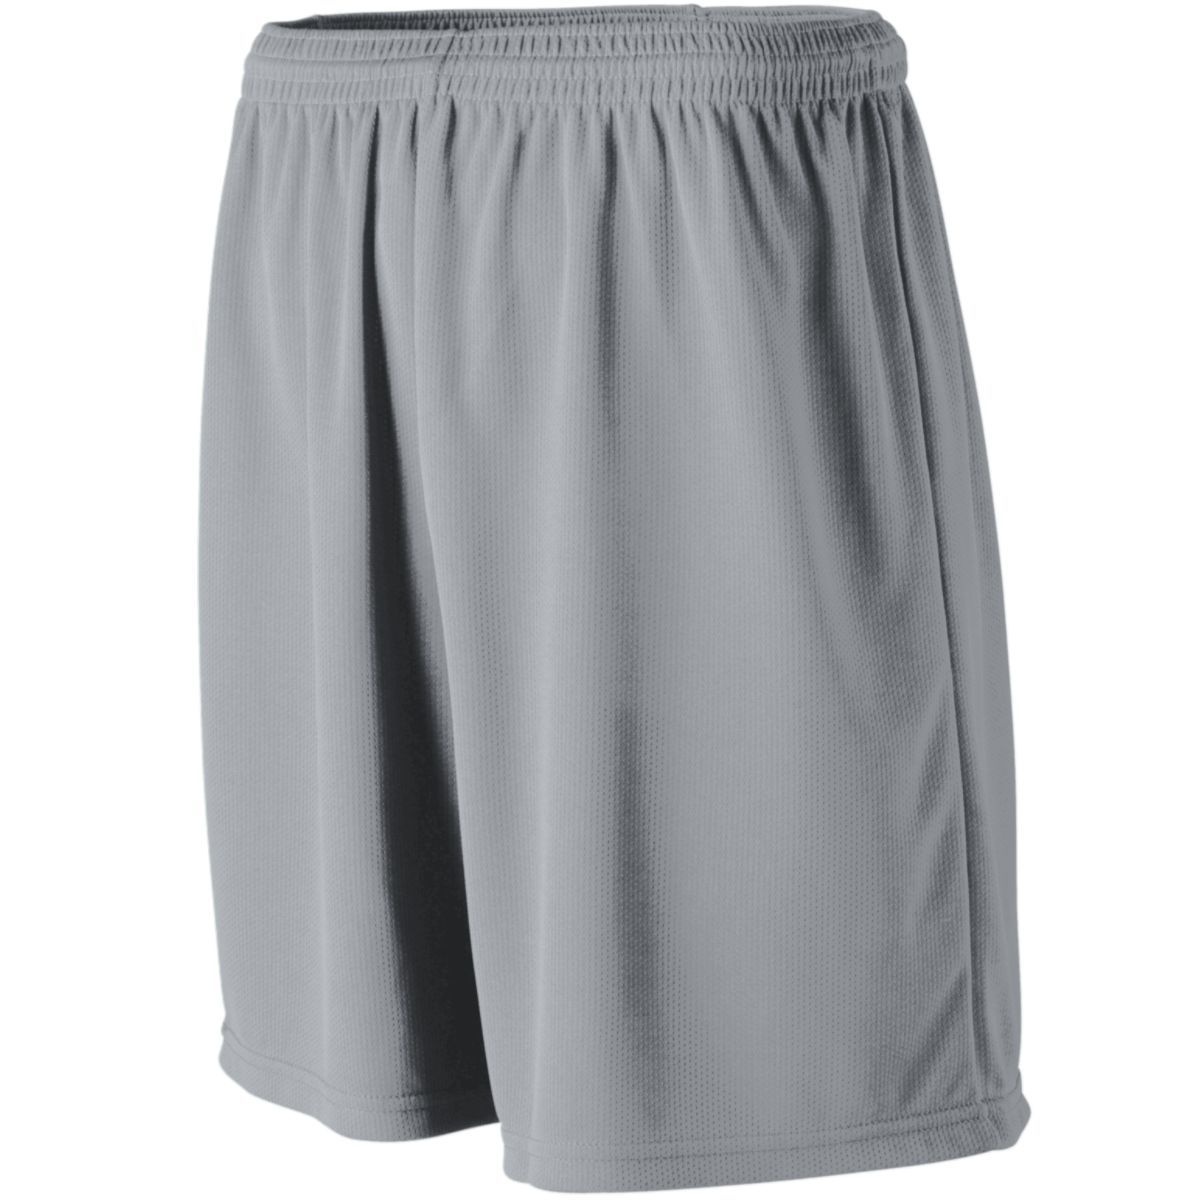 Augusta Sportswear Youth Wicking Mesh Athletic Shorts in Silver Grey  -Part of the Youth, Youth-Shorts, Augusta-Products product lines at KanaleyCreations.com